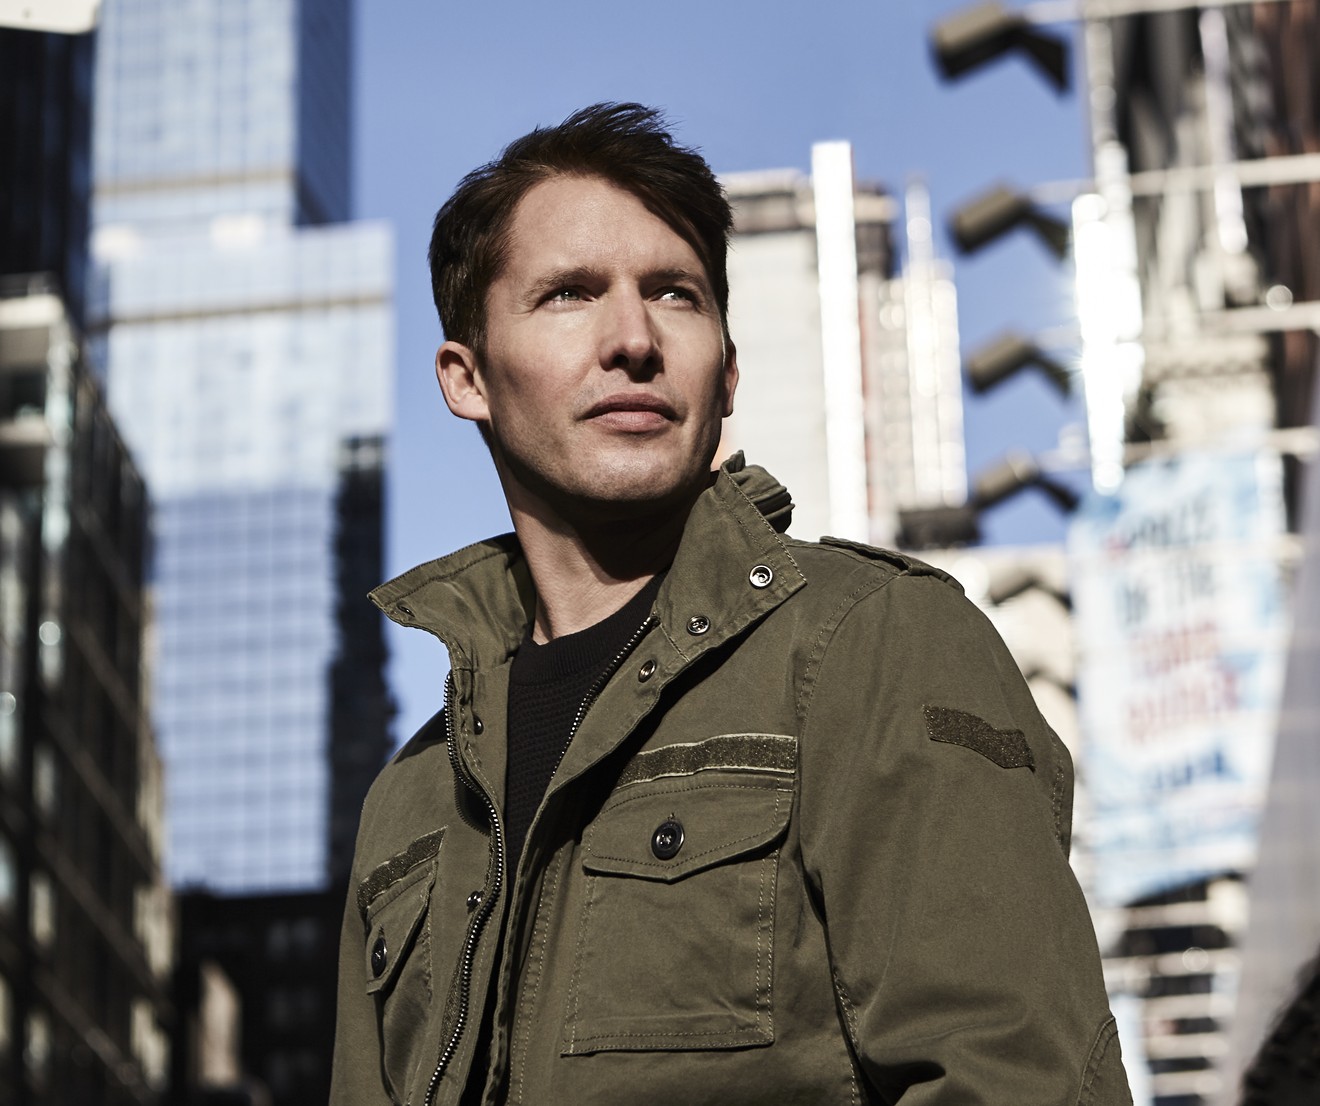 James Blunt is touring  in support of his new album, The Afterlove, with Ed Sheeran.